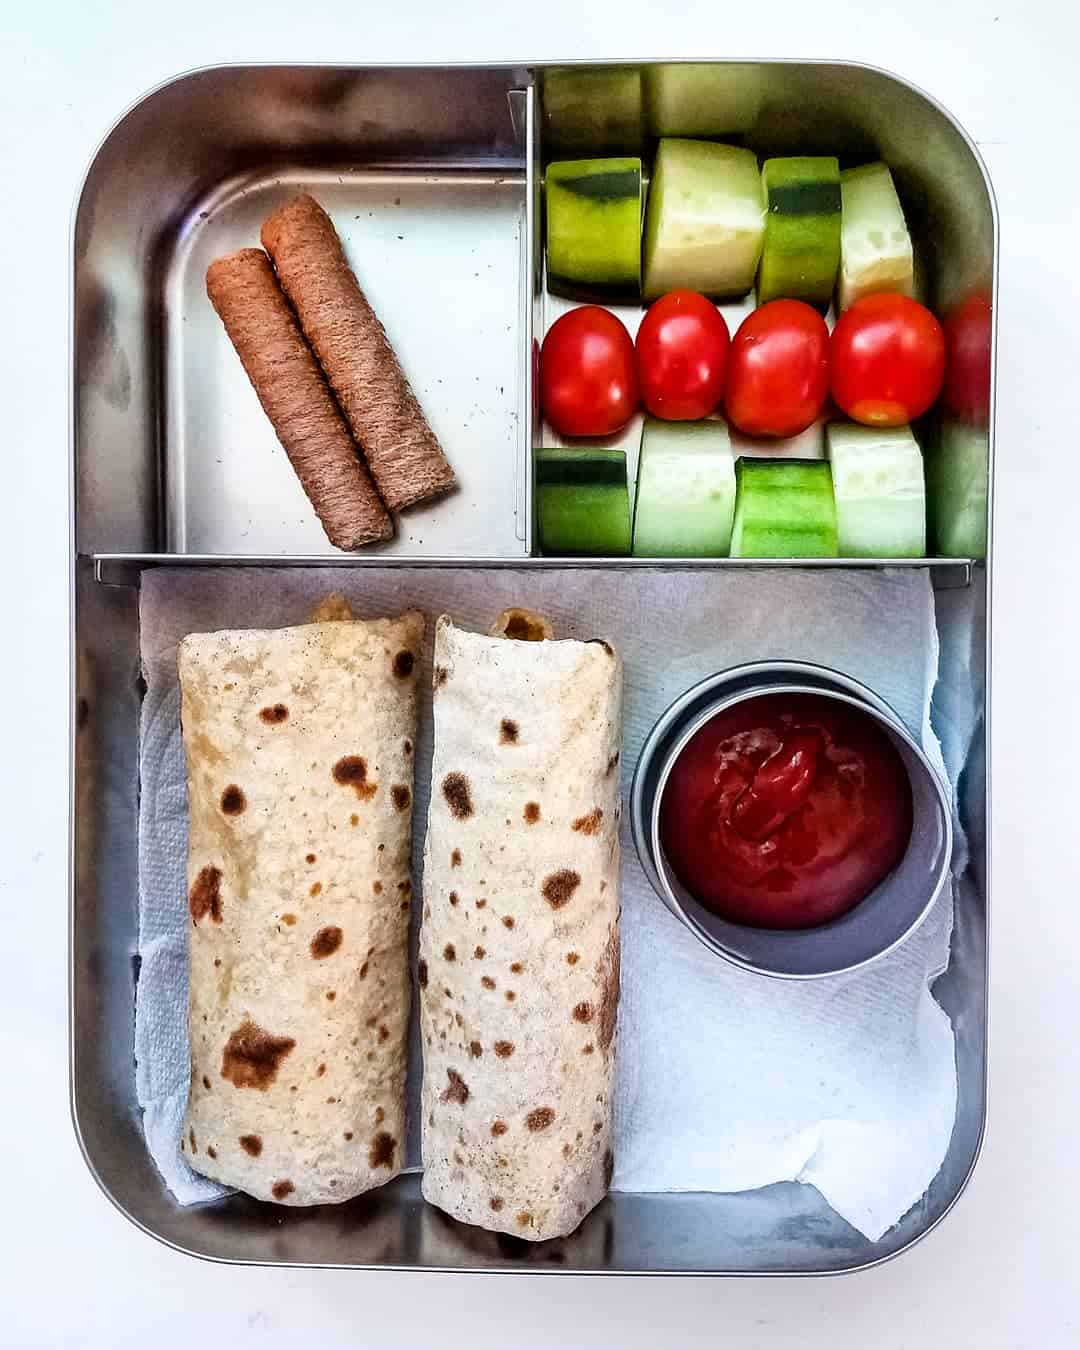 Bean and Cheese Burritos, chocolate coconut rolls and cucumber, cherrytomatoes